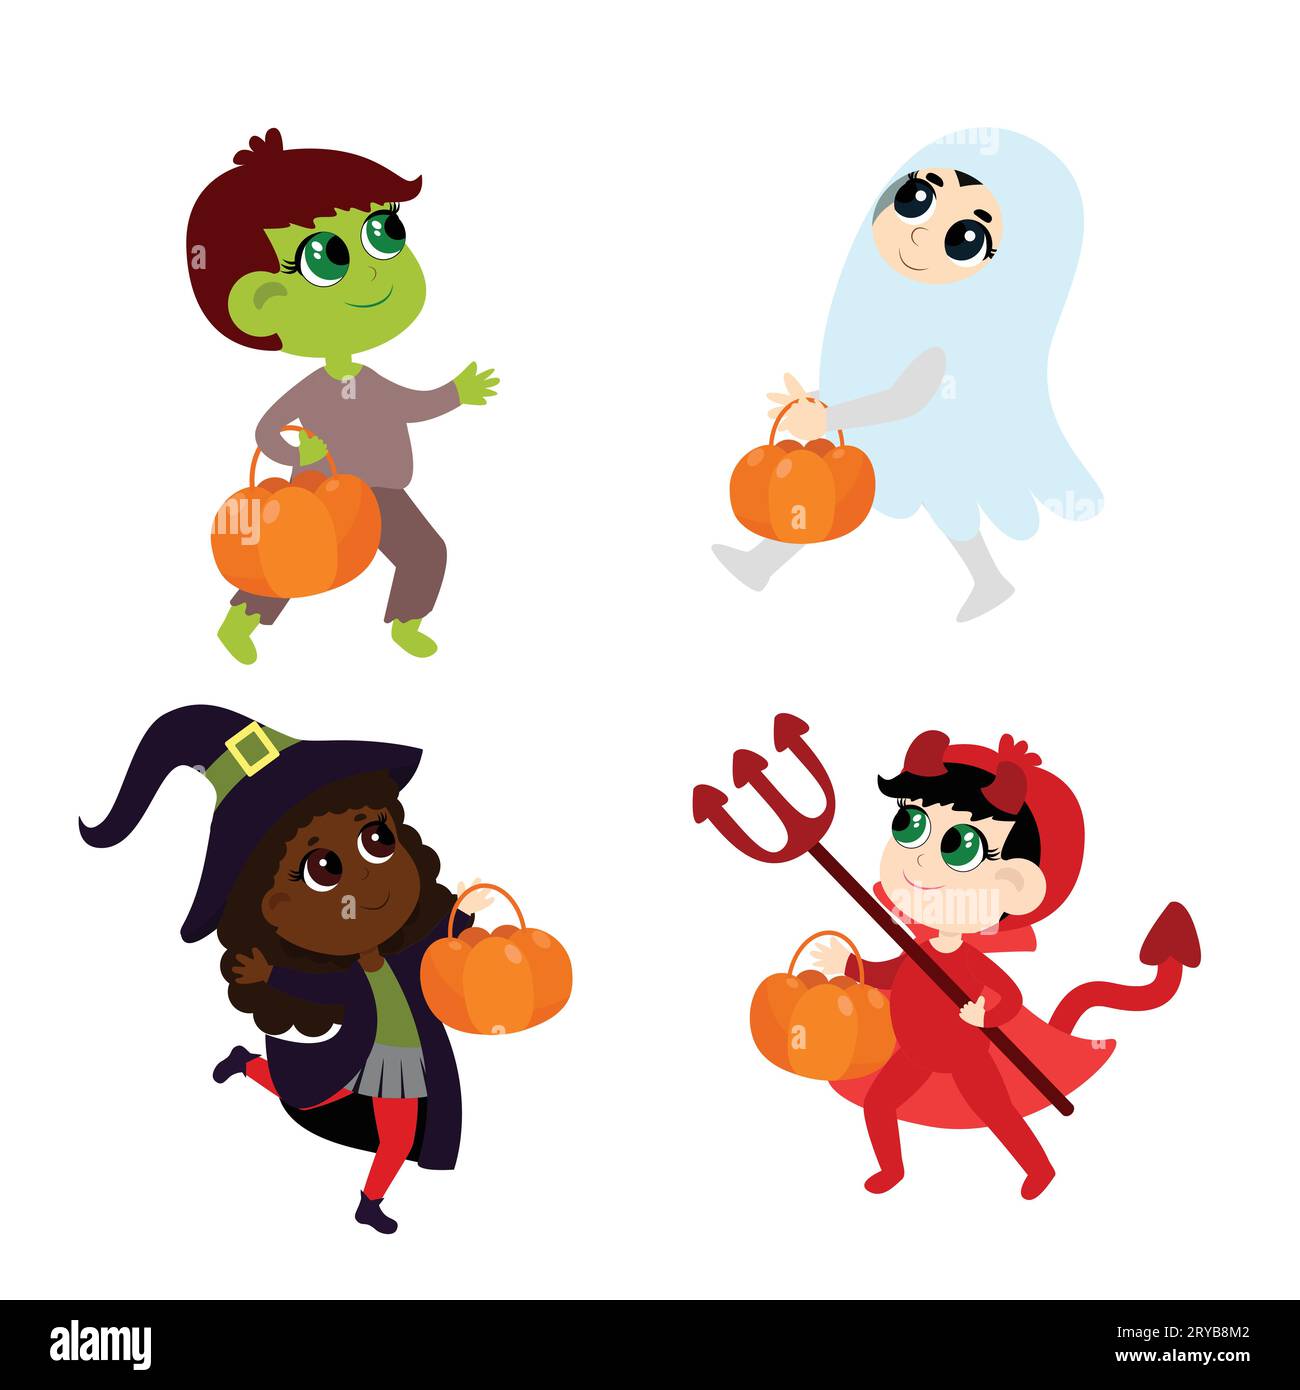 Halloween Set with cartoon style characters isolated on a white background. Children in the witch, zombies, devils and ghosts. Stock Vector